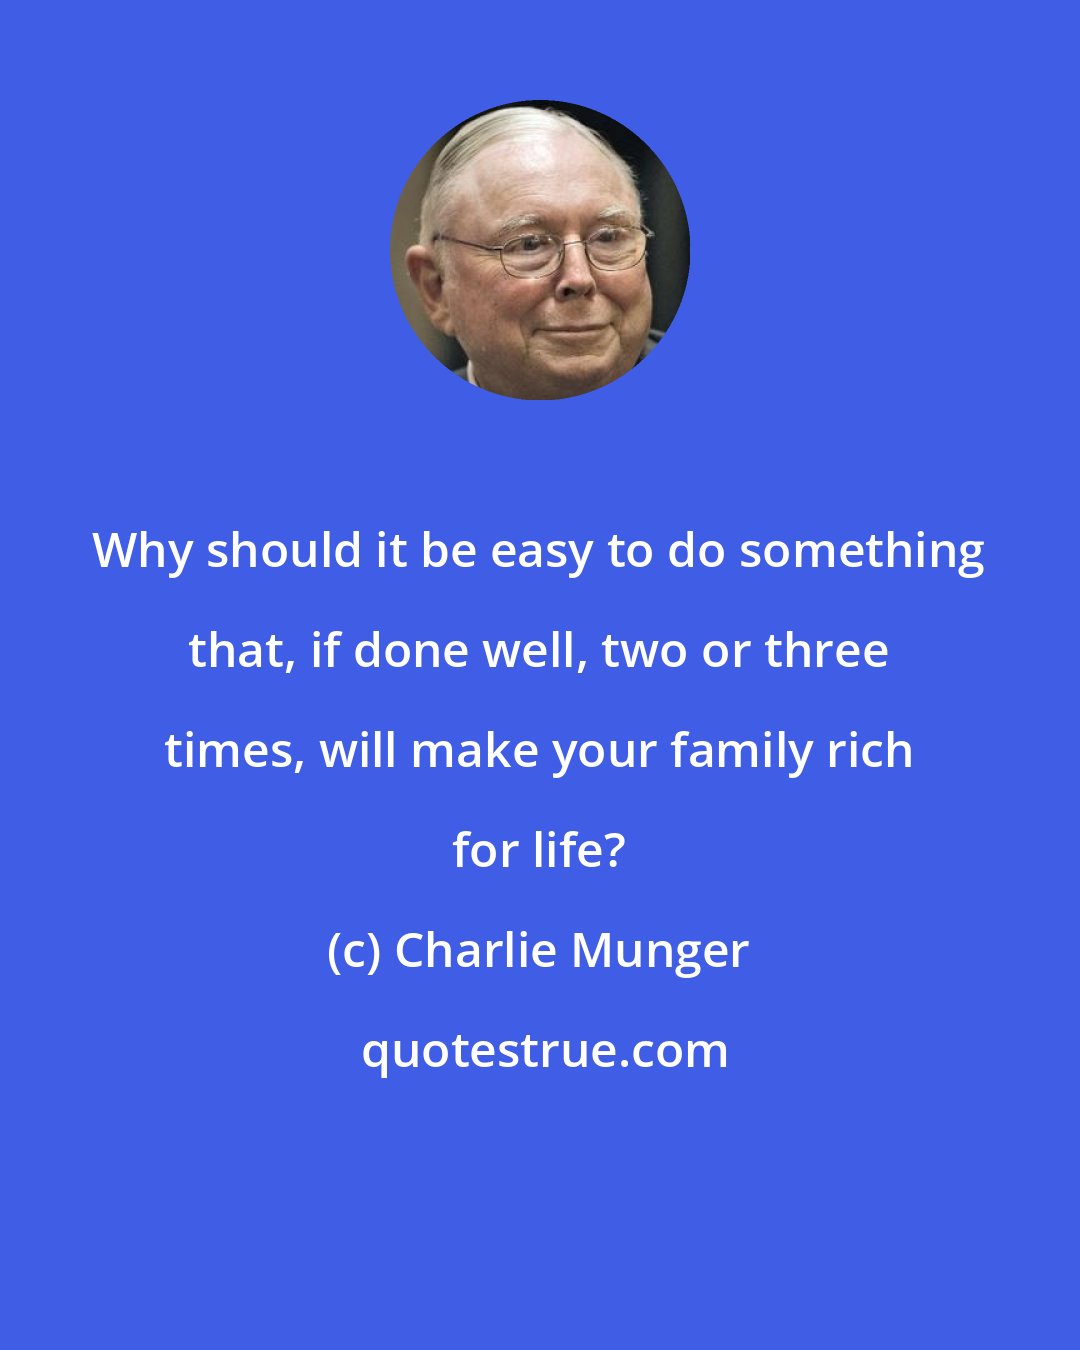 Charlie Munger: Why should it be easy to do something that, if done well, two or three times, will make your family rich for life?